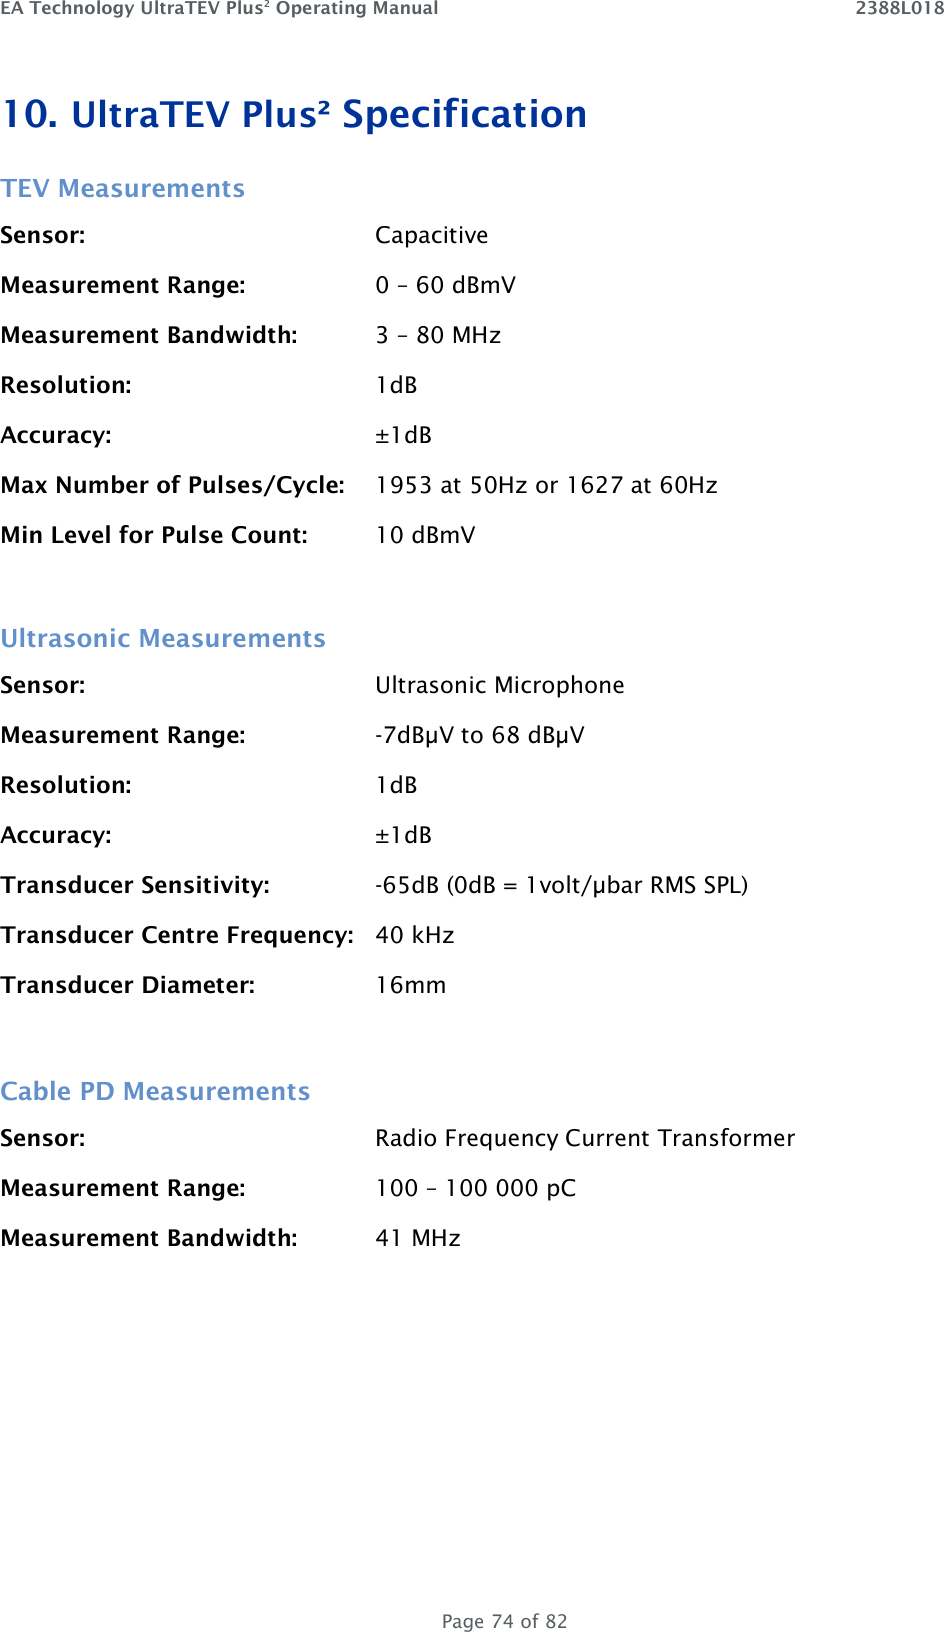 EA Technology UltraTEV Plus2 Operating Manual    2388L018   Page 74 of 82 10. UltraTEV Plus² Specification TEV Measurements Sensor:        Capacitive Measurement Range:    0 – 60 dBmV Measurement Bandwidth:   3 – 80 MHz Resolution:  1dB Accuracy:  ±1dB Max Number of Pulses/Cycle:  1953 at 50Hz or 1627 at 60Hz Min Level for Pulse Count:  10 dBmV  Ultrasonic Measurements Sensor:        Ultrasonic Microphone Measurement Range:    -7dBµV to 68 dBµV Resolution:        1dB Accuracy:        ±1dB Transducer Sensitivity:    -65dB (0dB = 1volt/µbar RMS SPL) Transducer Centre Frequency:  40 kHz Transducer Diameter:    16mm  Cable PD Measurements Sensor:        Radio Frequency Current Transformer Measurement Range:    100 – 100 000 pC Measurement Bandwidth:   41 MHz    